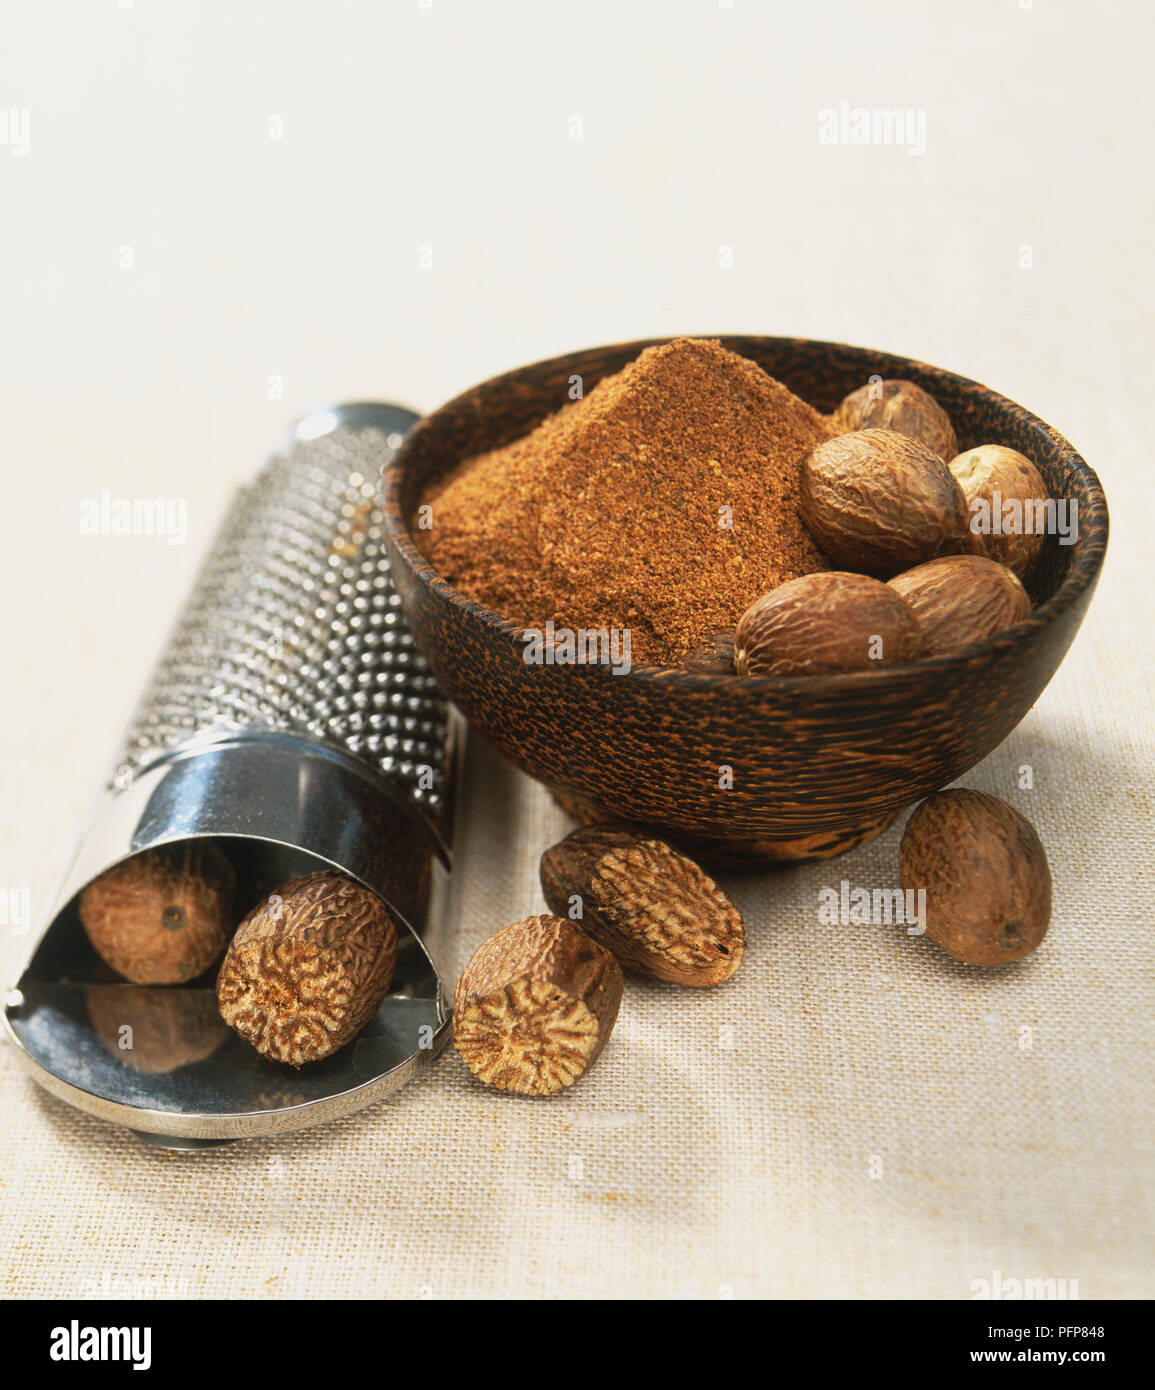 https://c8.alamy.com/comp/PFP848/myristica-fragrans-whole-nutmeg-kernels-and-ground-nutmeg-in-wooden-bowl-whole-kernels-in-lidded-compartment-of-metal-grater-close-up-PFP848.jpg